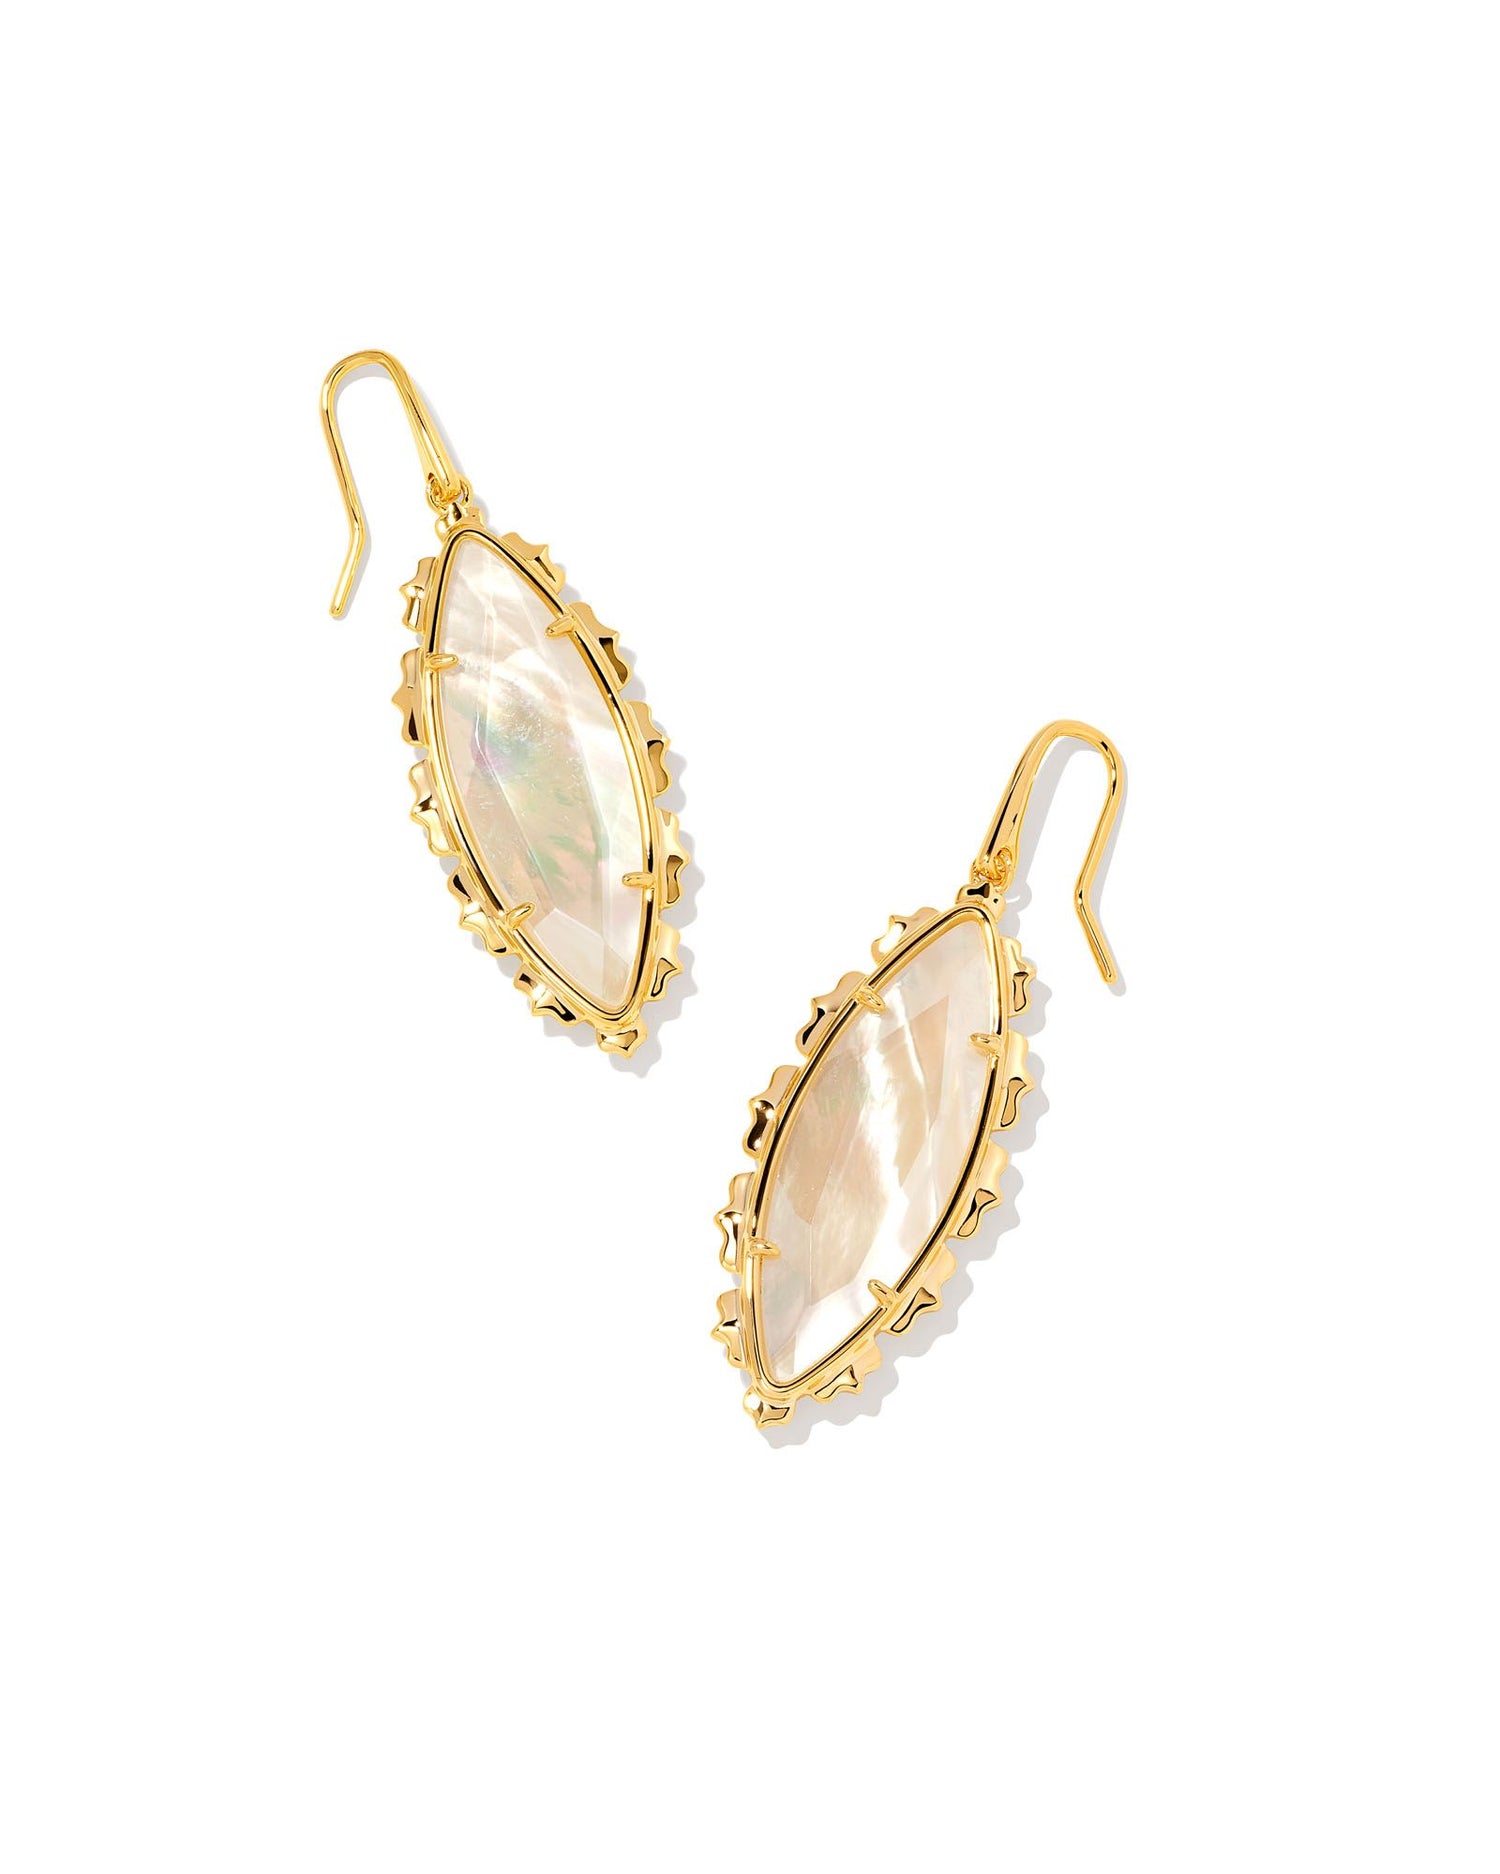 Taking inspiration from vintage KS styles, the Genevieve Gold Drop Earrings are slender, sleek, and oh-so-chic. With petal-like metal detailing surrounding a shimmering marquise stone, these earrings are a new take on classic glamour.  Dimensions- 1.22"L X 0.52"W Metal- 14K Gold plated over brass Closure- Ear Post Material-  Abalone Color: Light Pink mother of pearl